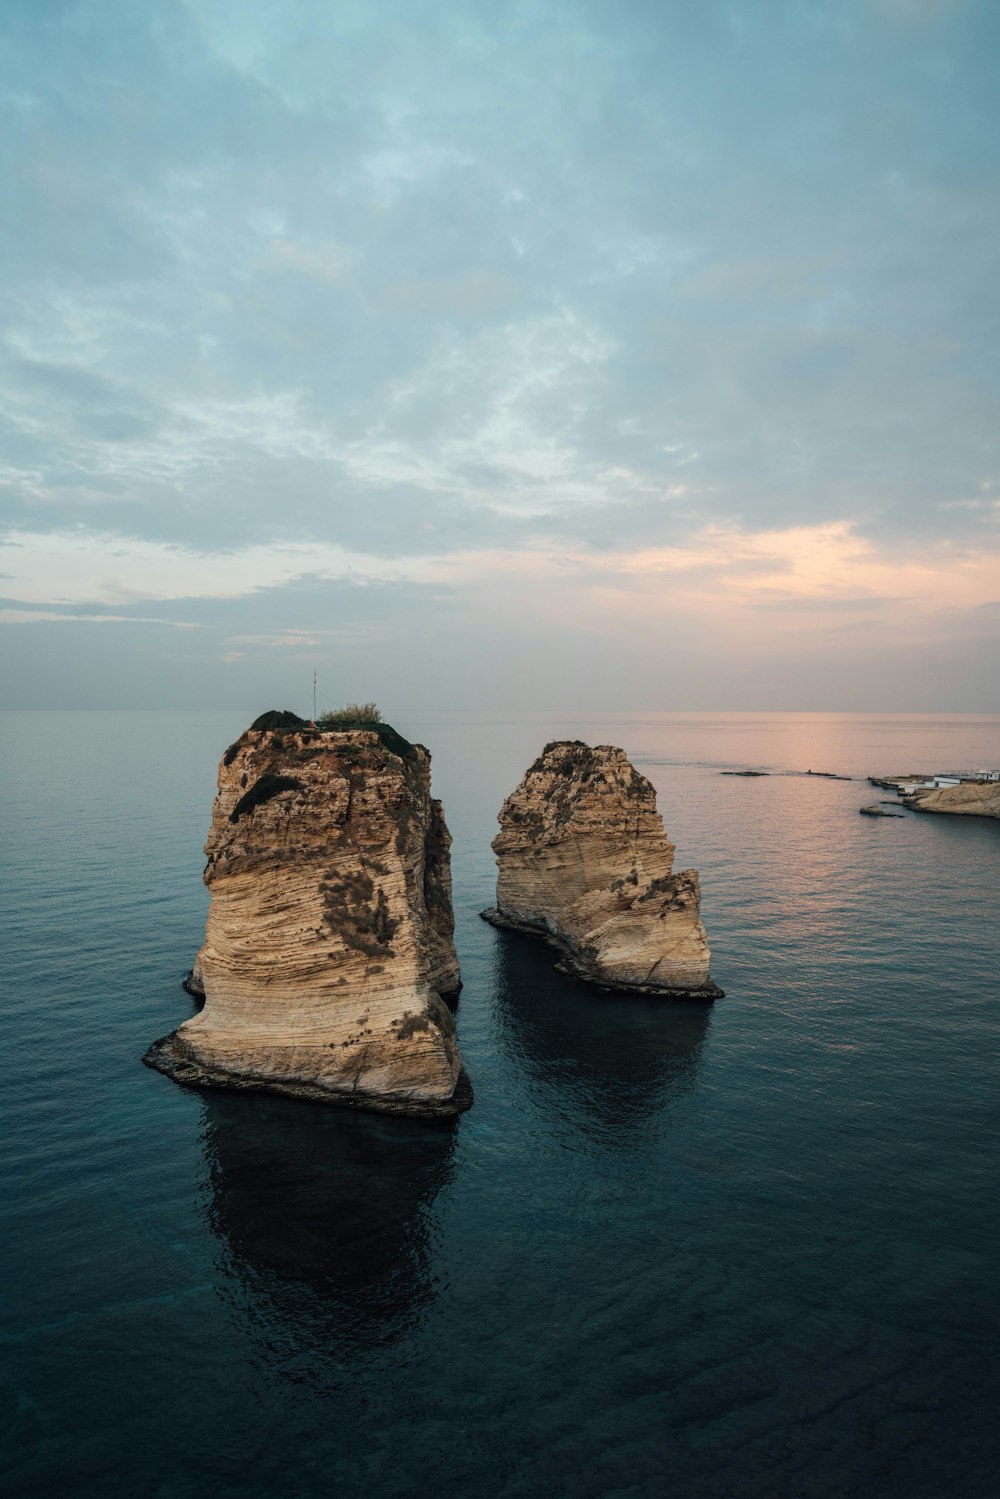 Beirut Lebanon Pictures Download Free Images On Unsplash Images, Photos, Reviews